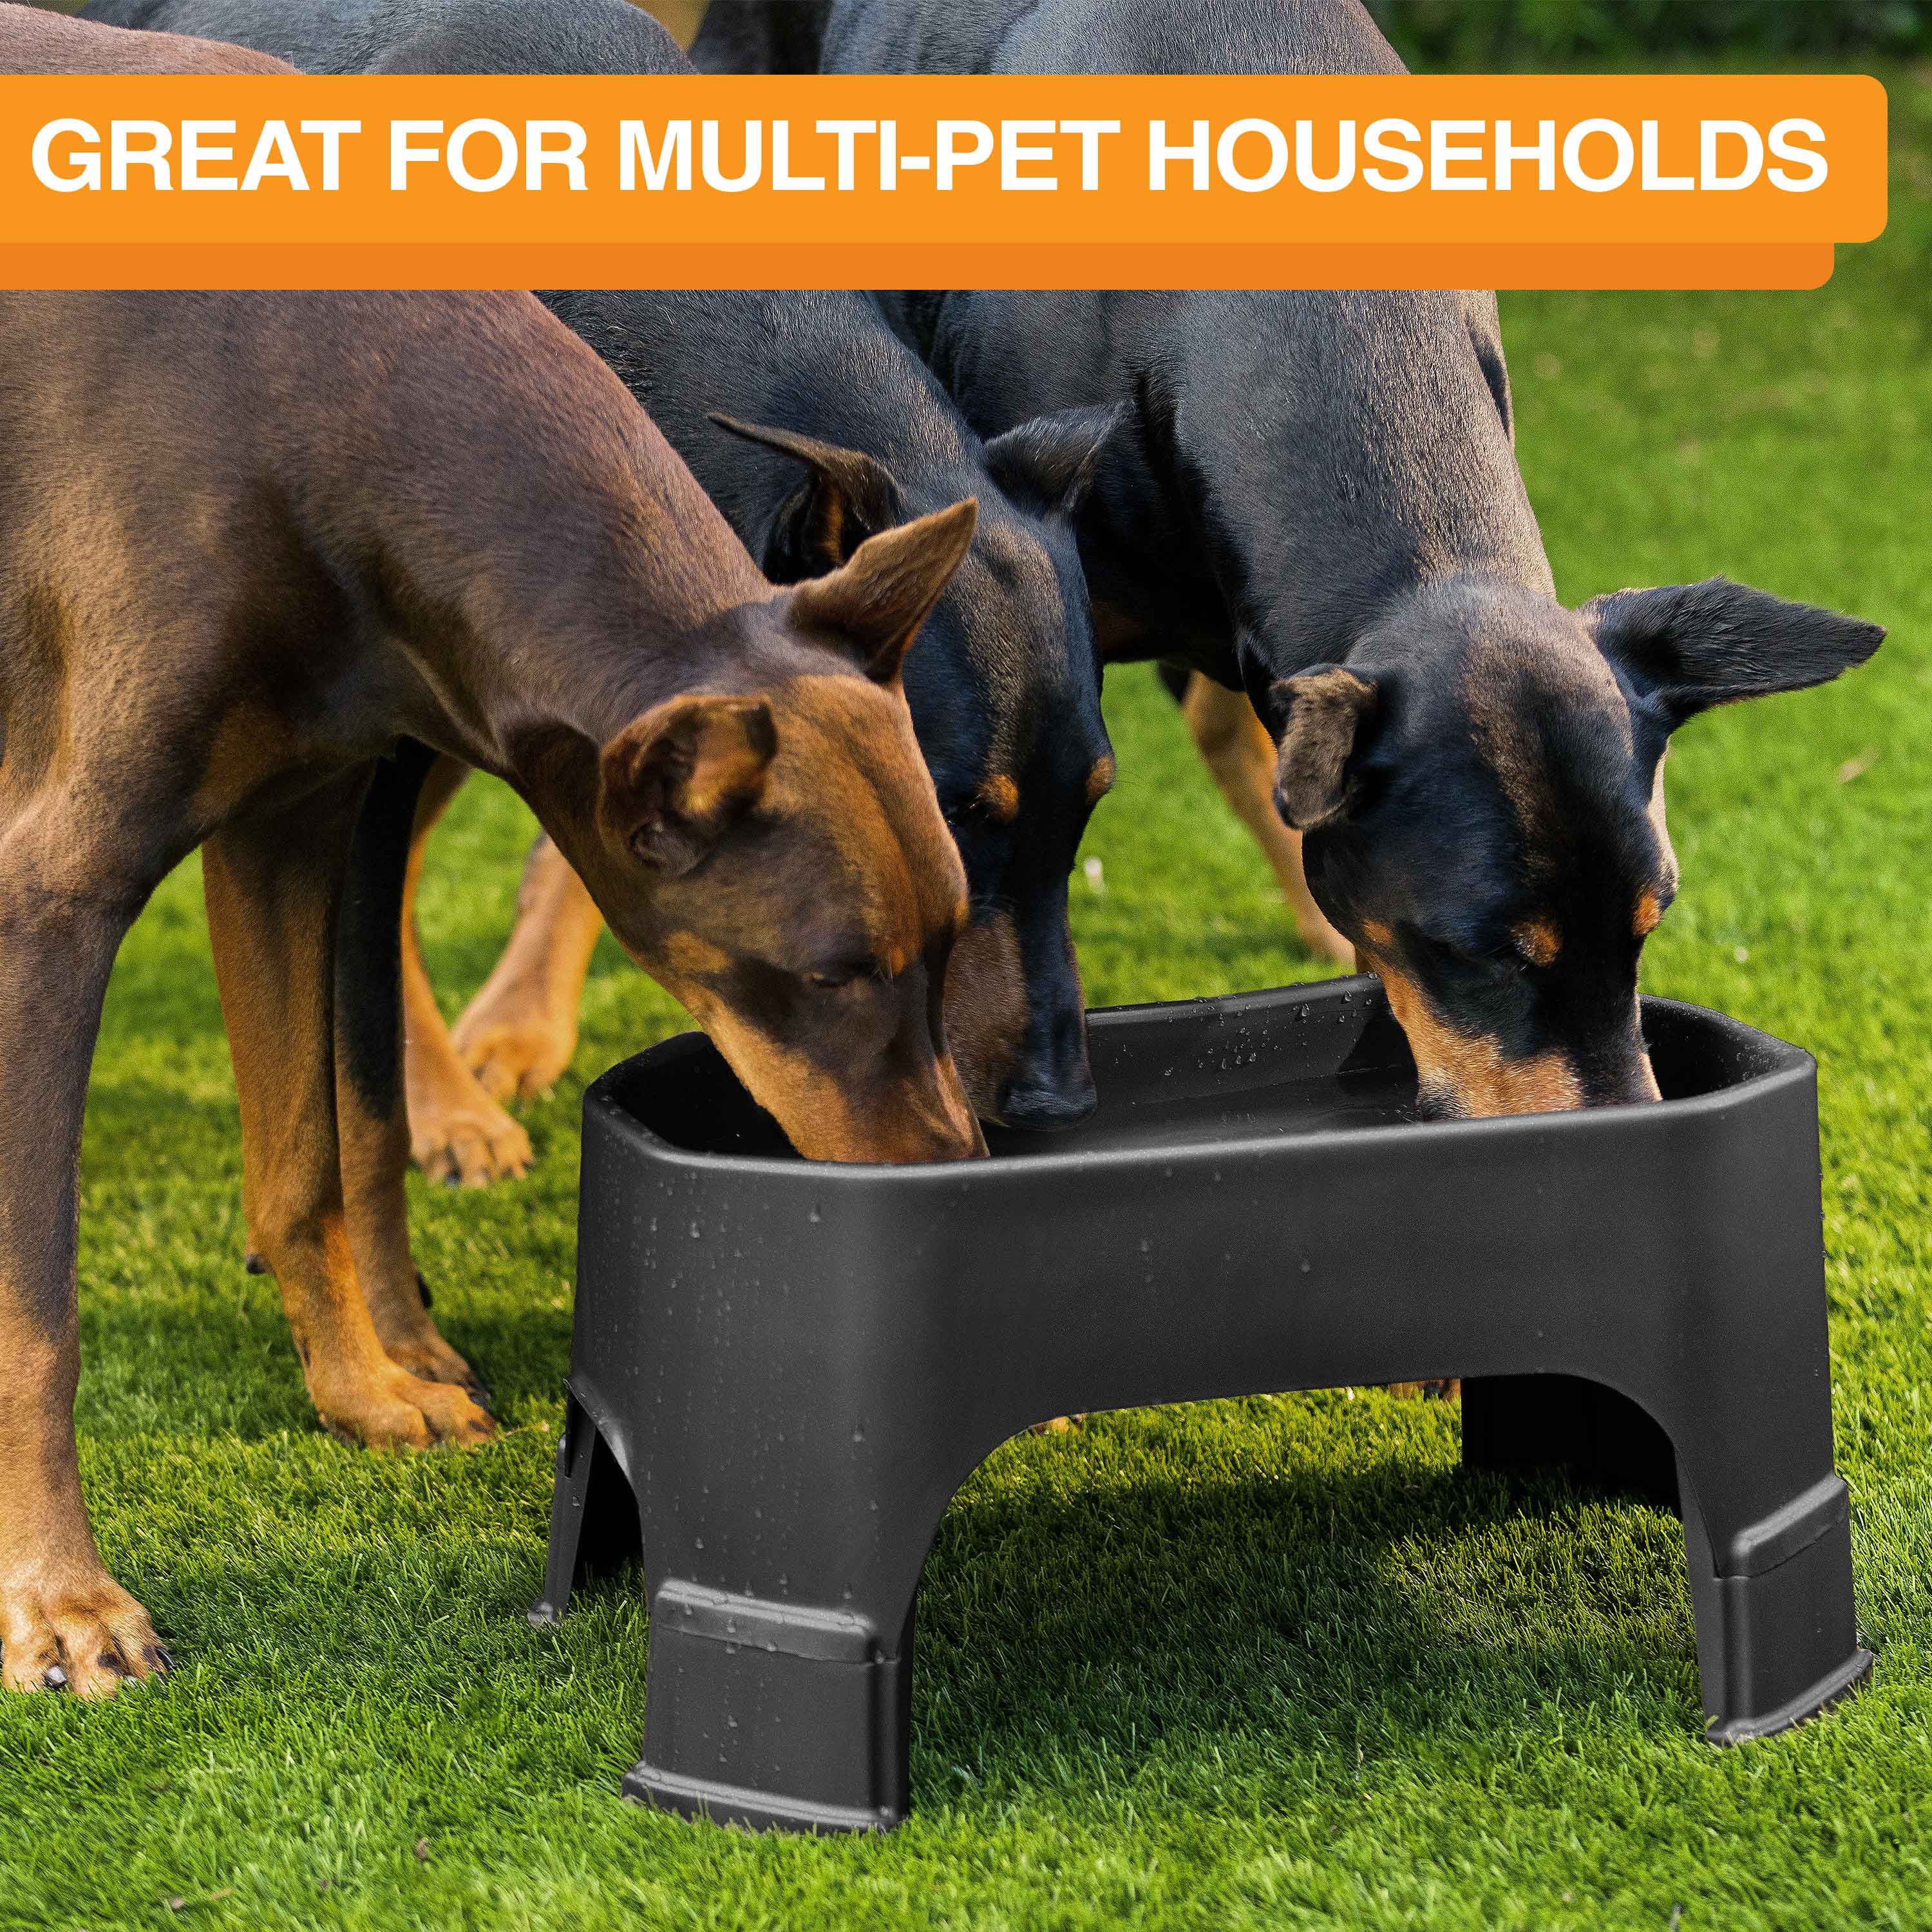 Podinor Dog Water Bowls for Large Dogs - Stainless Steel Dog Food Bowl with  1.3 Gallon High Capacity for Big Giant Dogs (2 Pack) Black - 2 Pack